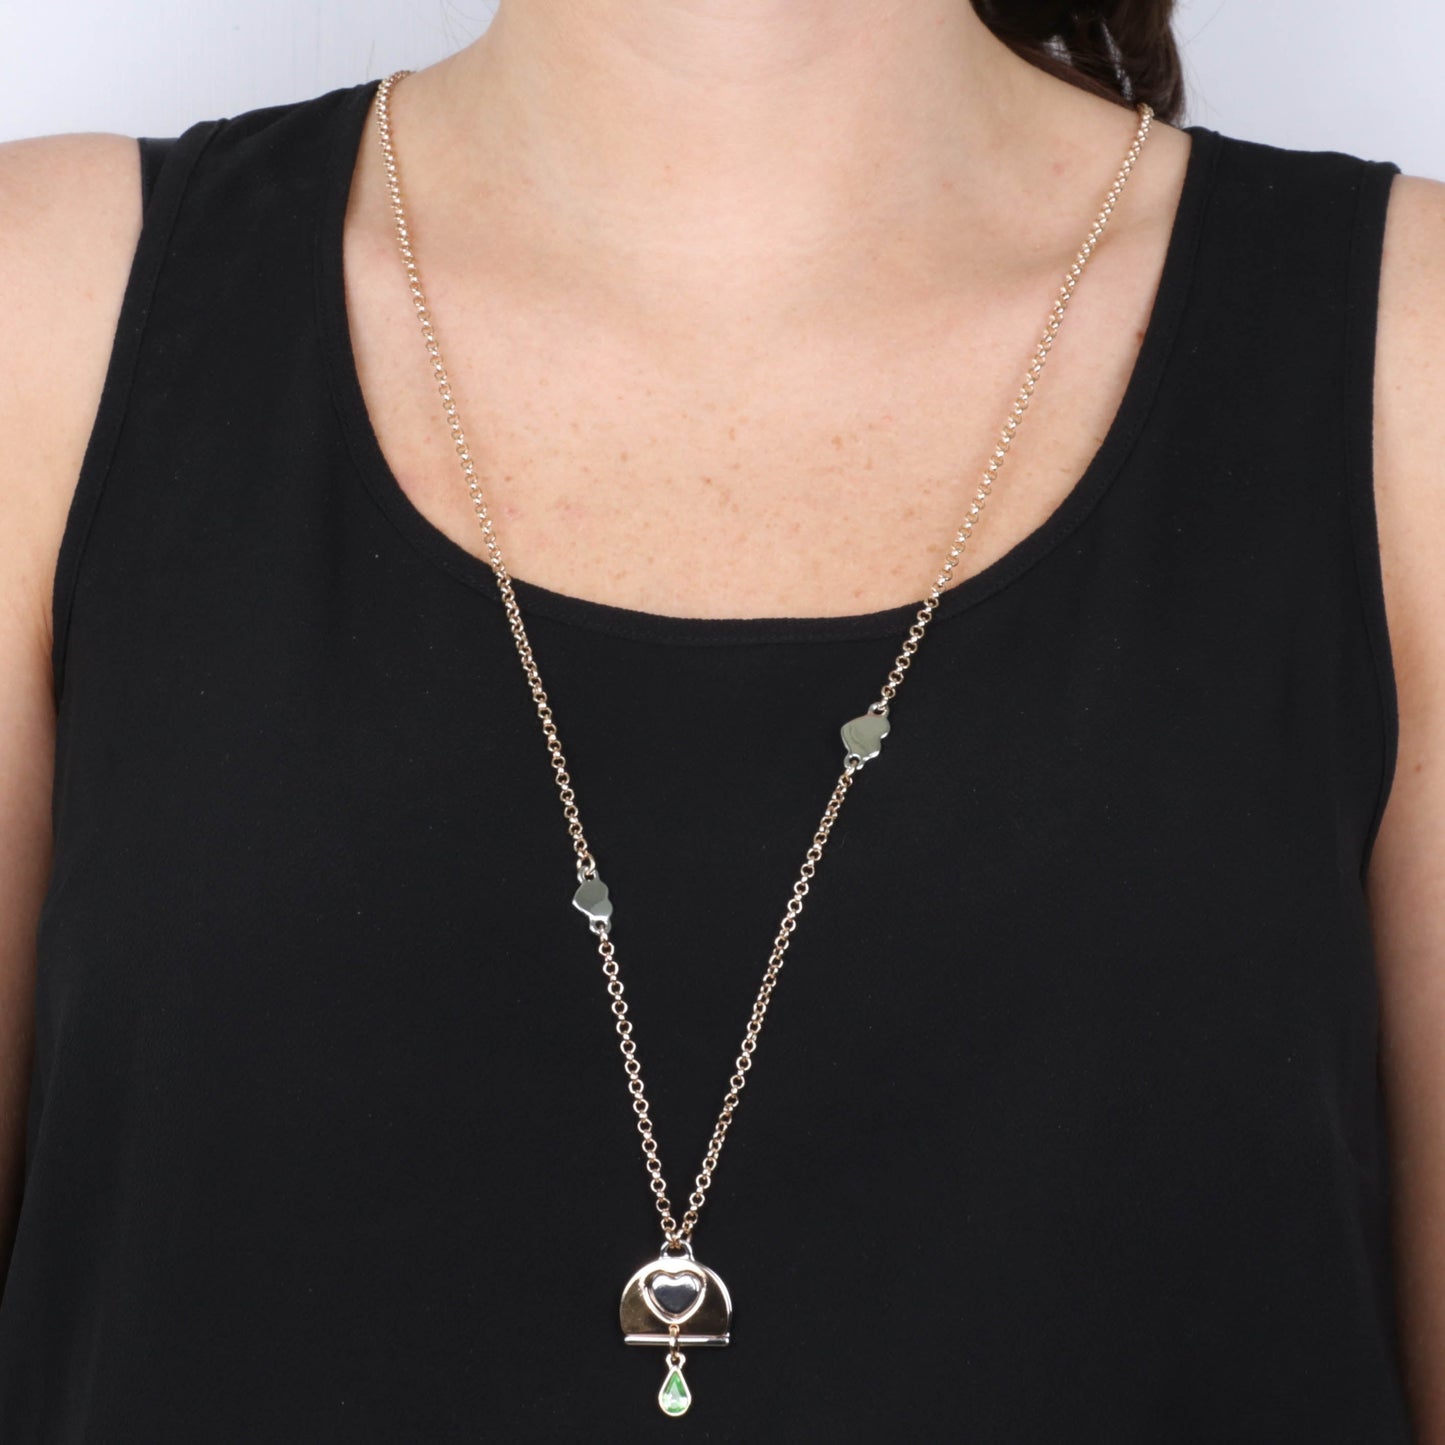 Long metal necklace with two -tone bell pendant